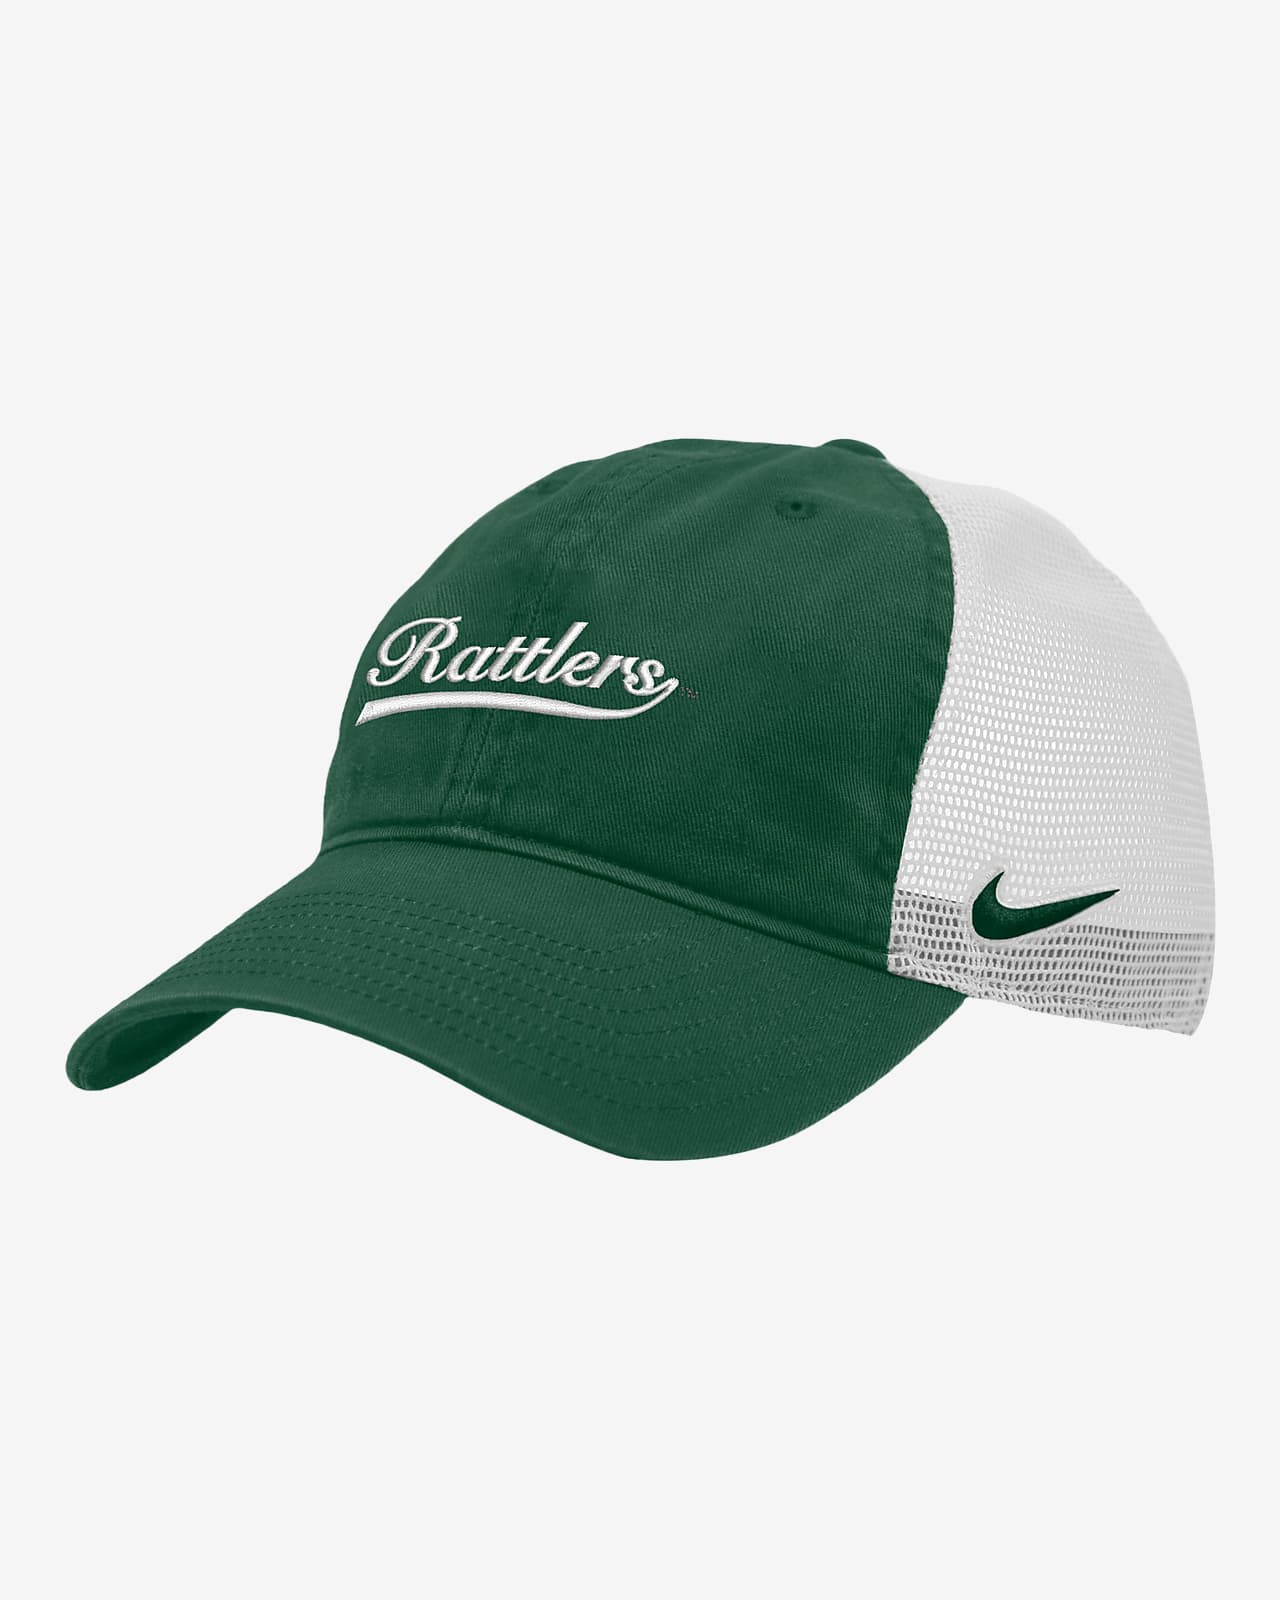 Florida A&M Heritage86 Nike College Trucker Hat